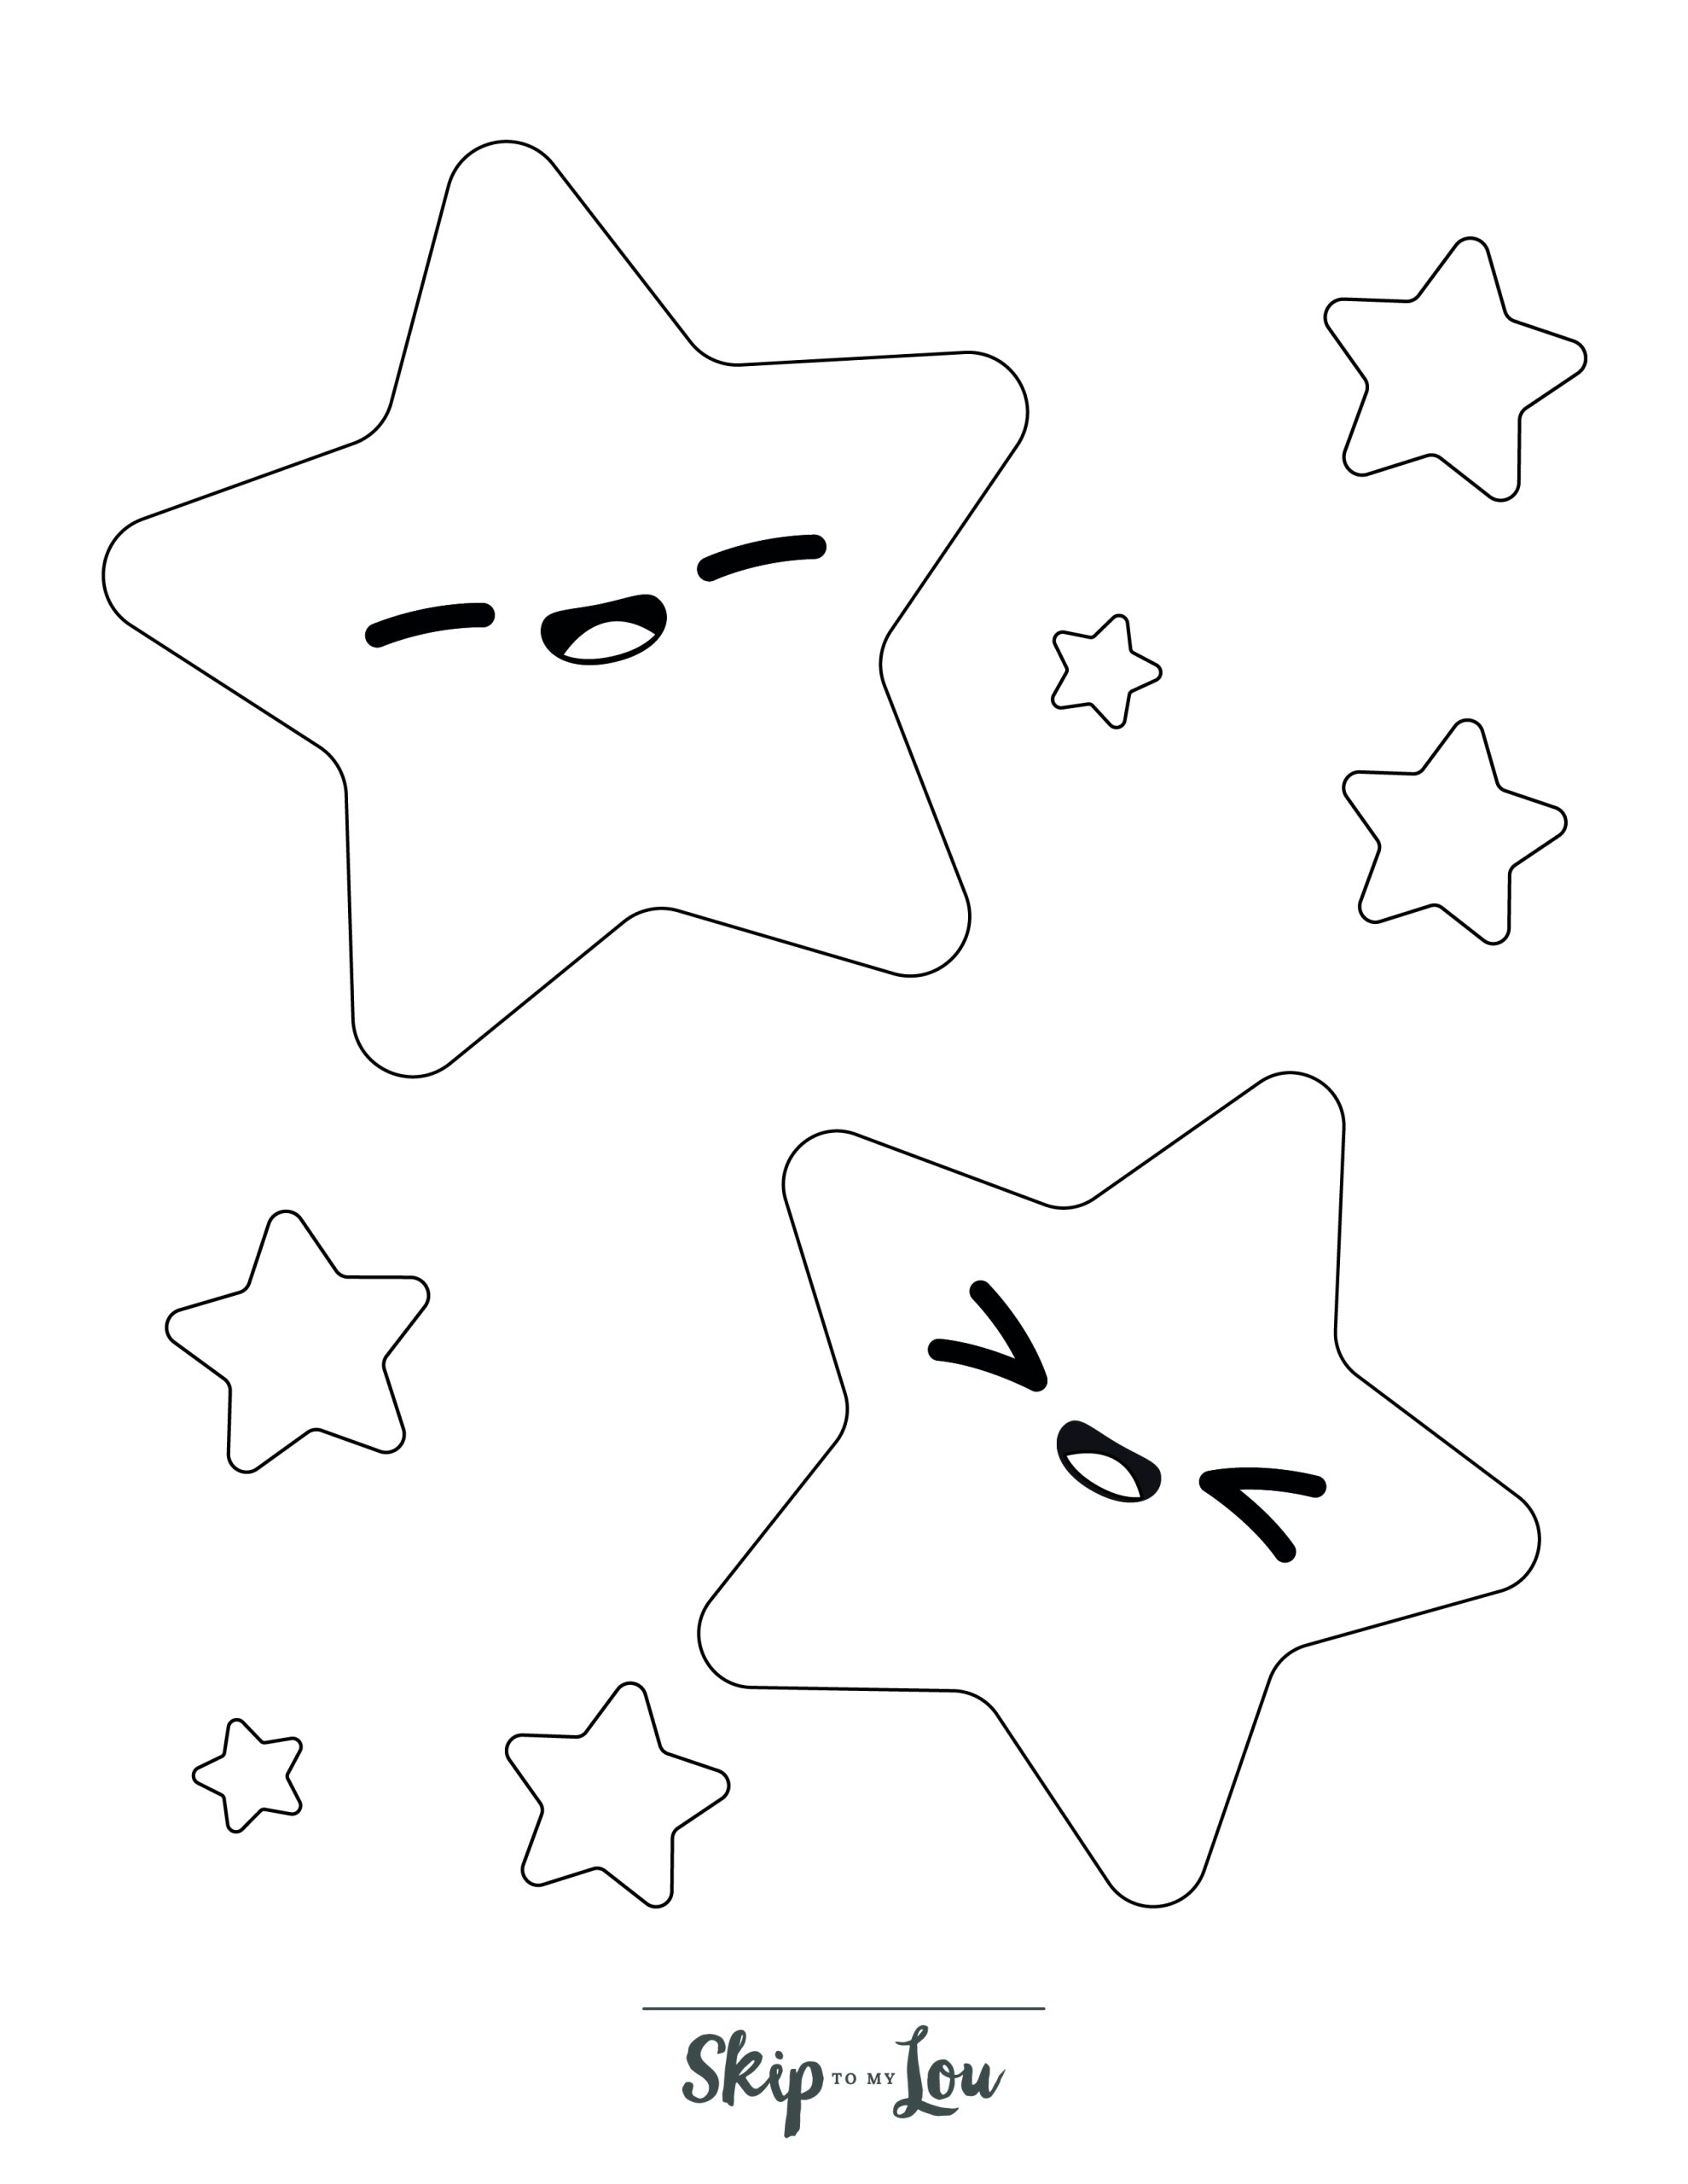 Star Coloring Page 2 - Line drawing of two small stars with faces 